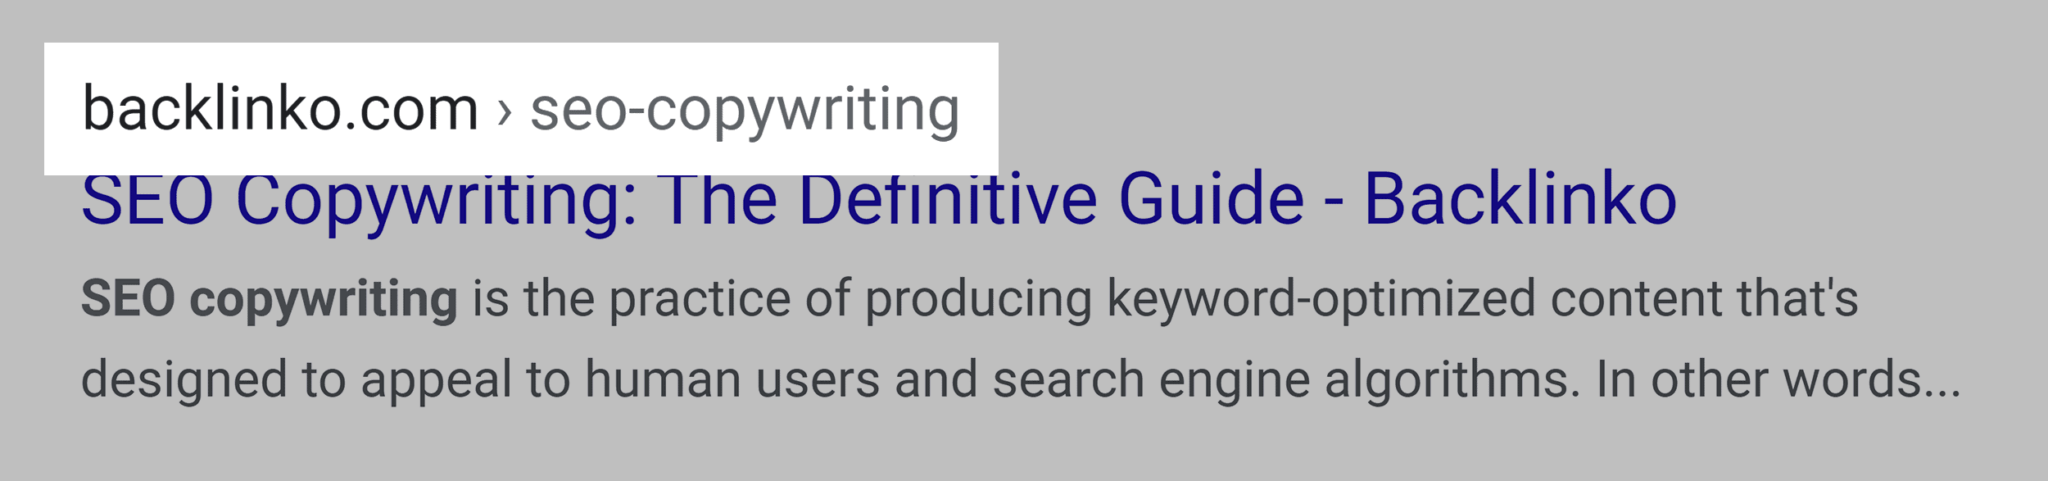 seo-copywriting-post-url How to Rank Higher On Google In 2023